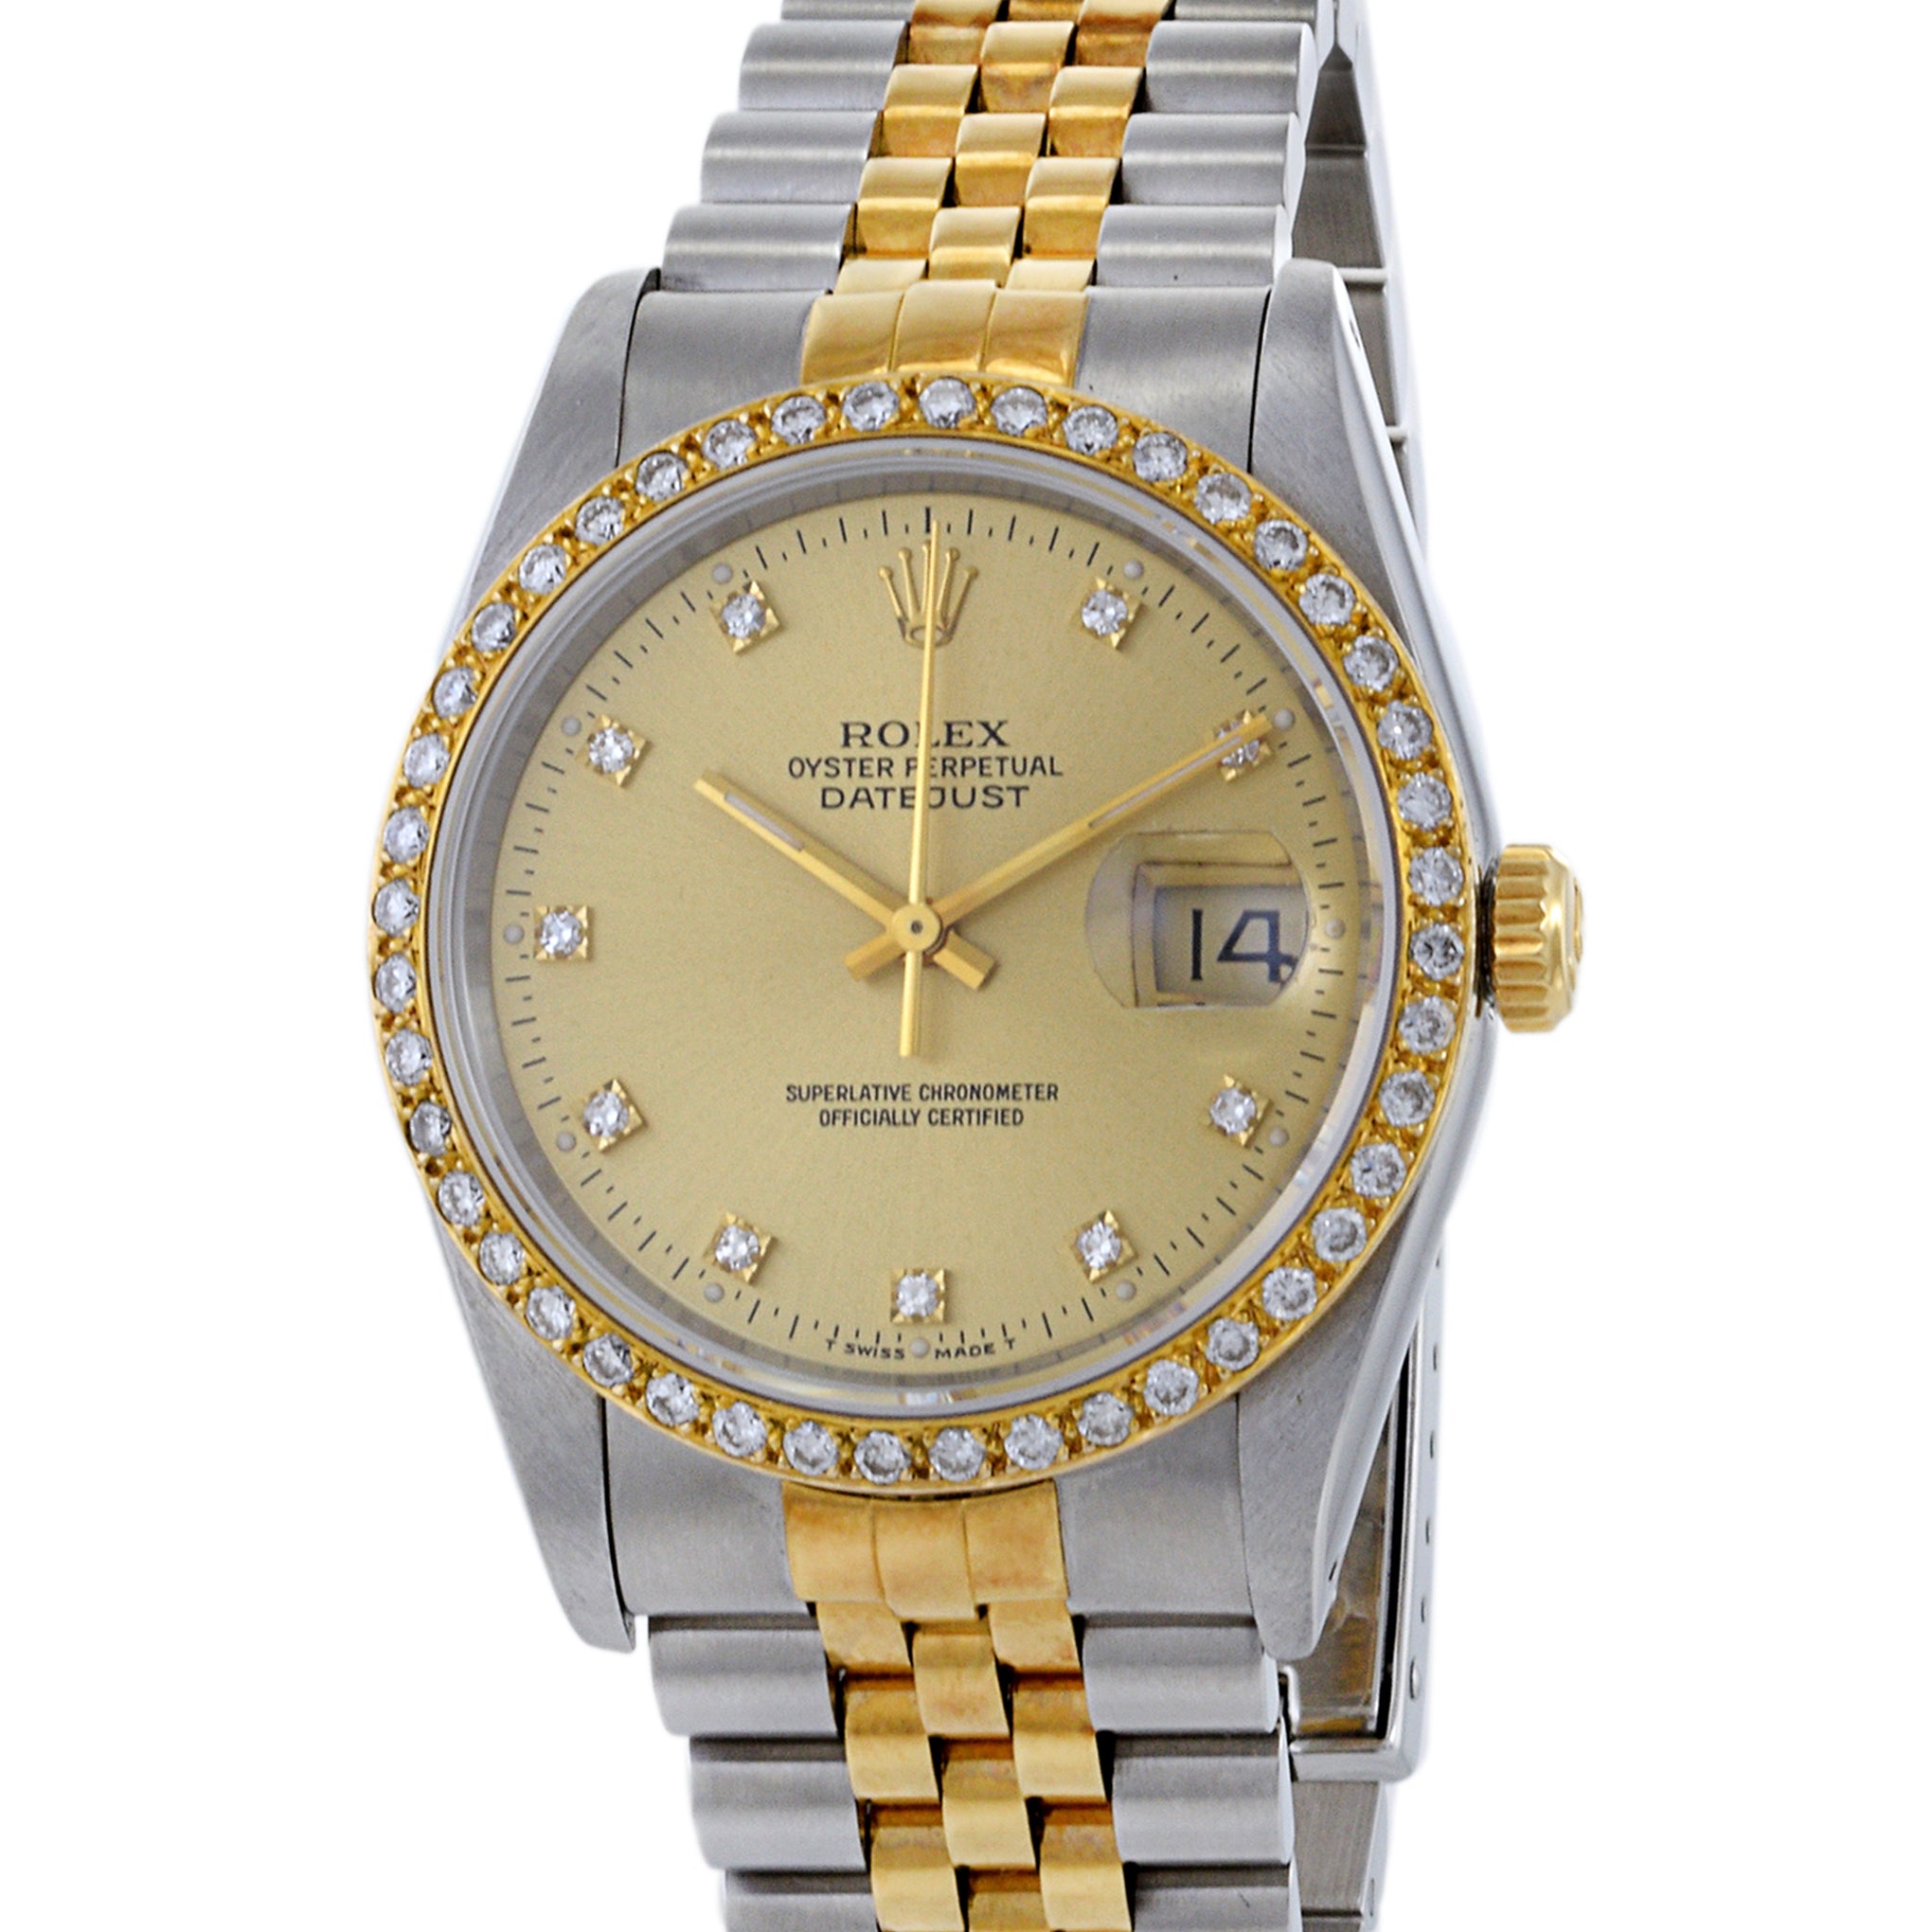 Rolex Datejust 36 reference 16233 Diamond Bezel and Markers Steel and 18K Yellow Gold